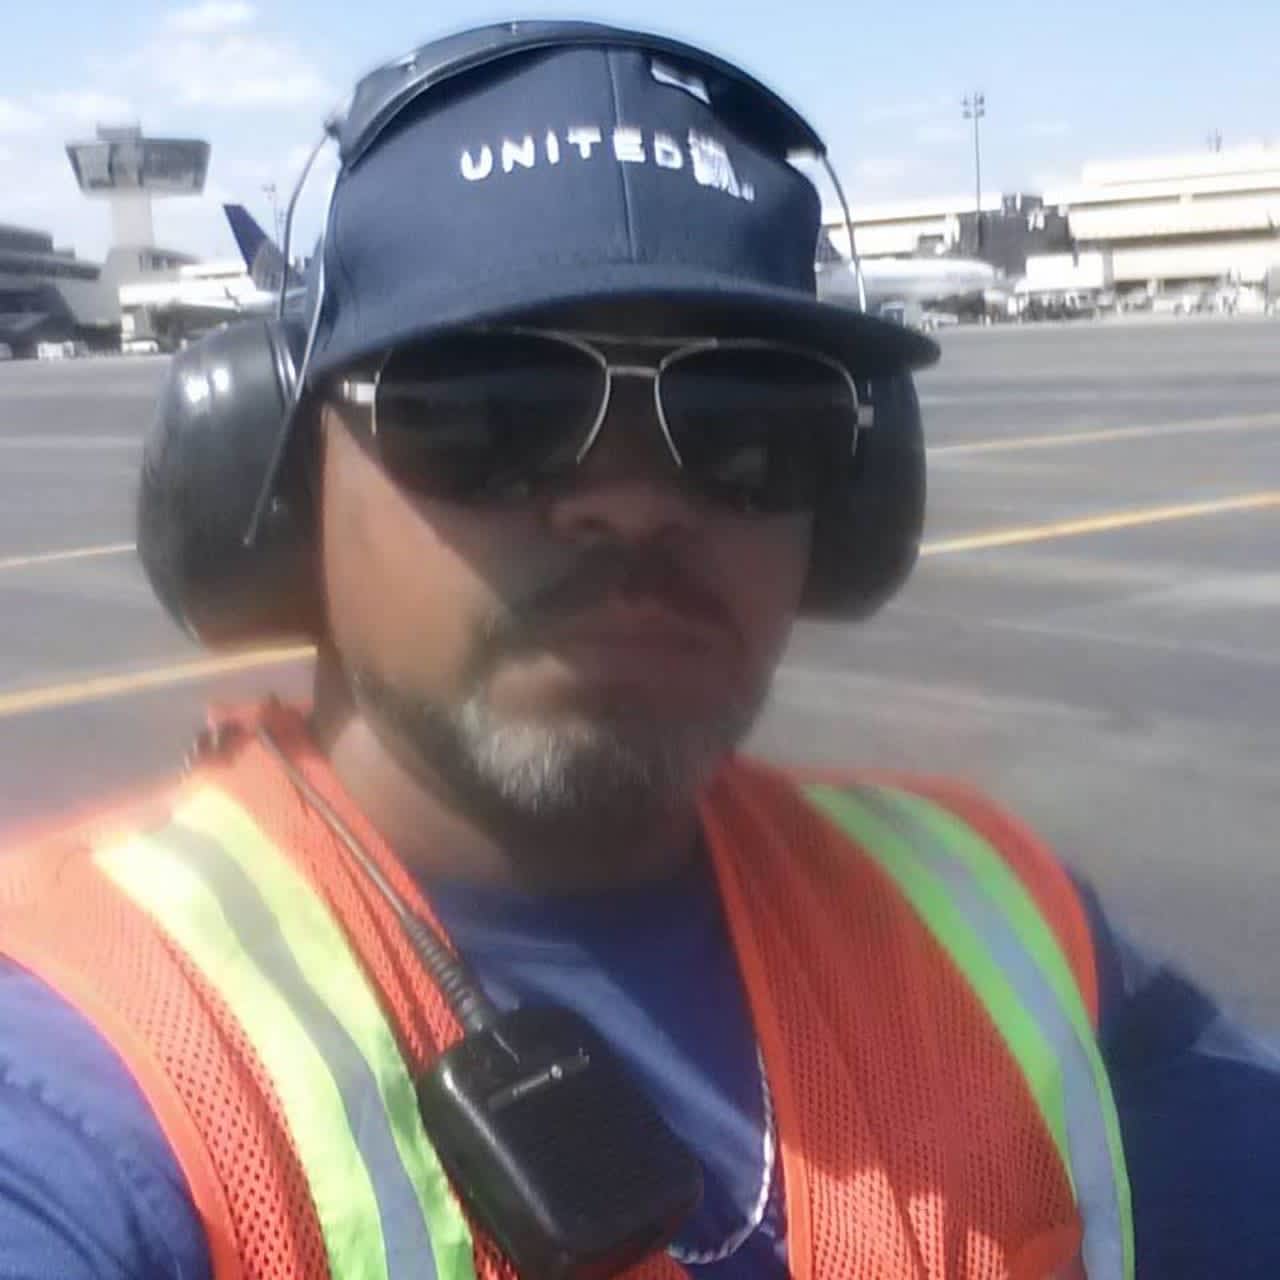 Carlos Consuegra, of Union City, was a United Airlines employee at Newark Airport.